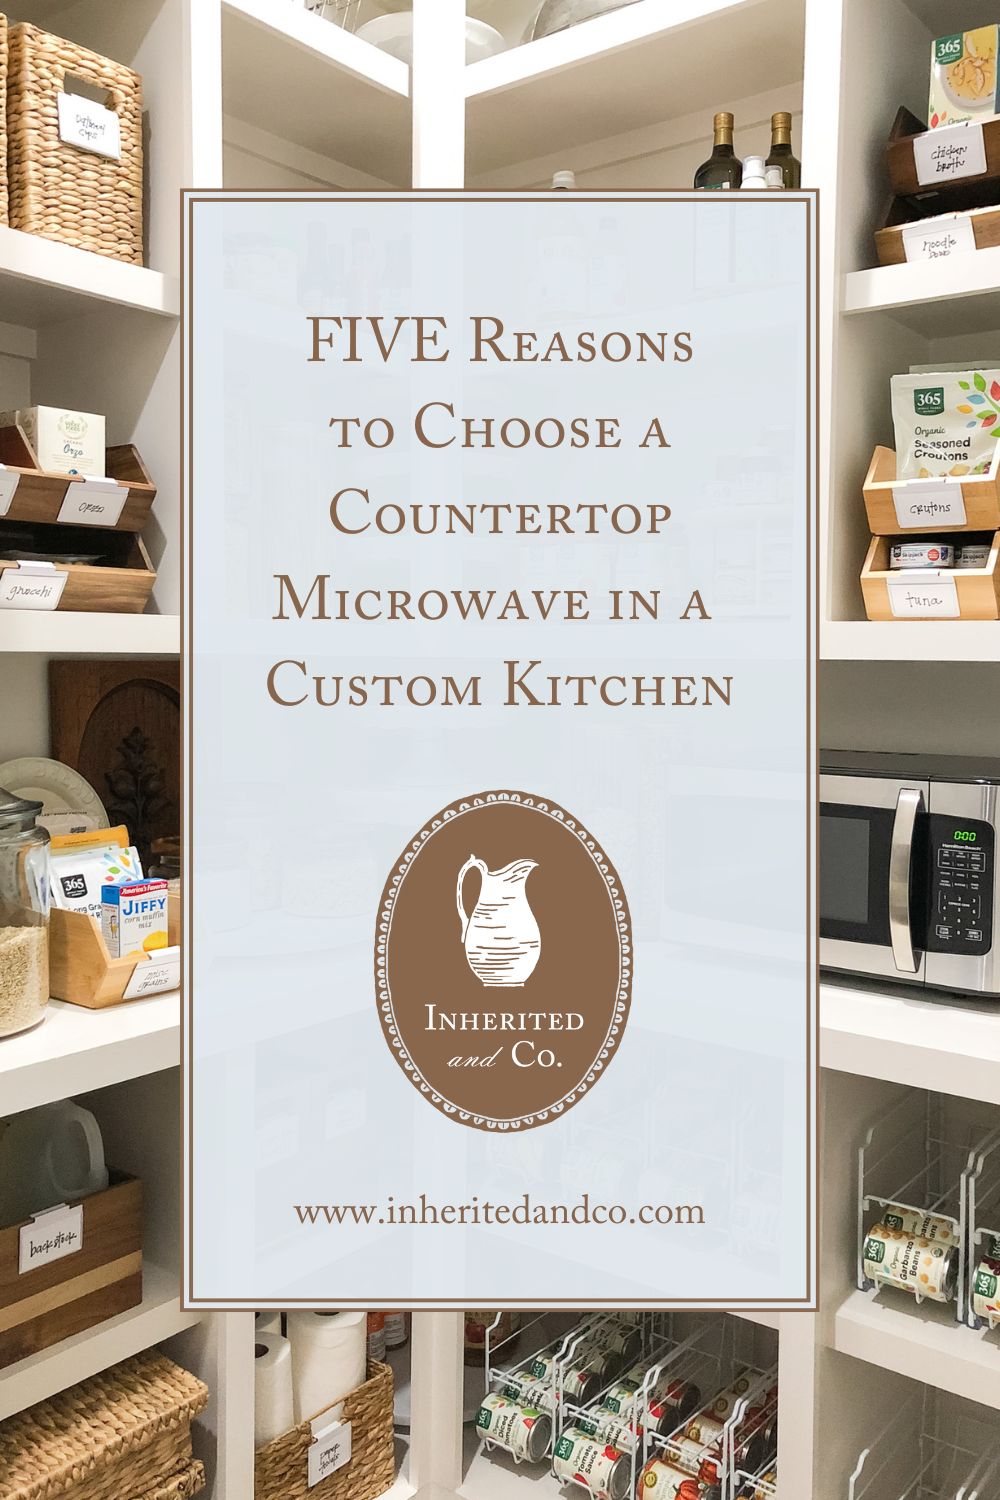 Five Reasons to Choose a Countertop Microwave in a Custom Kitchen